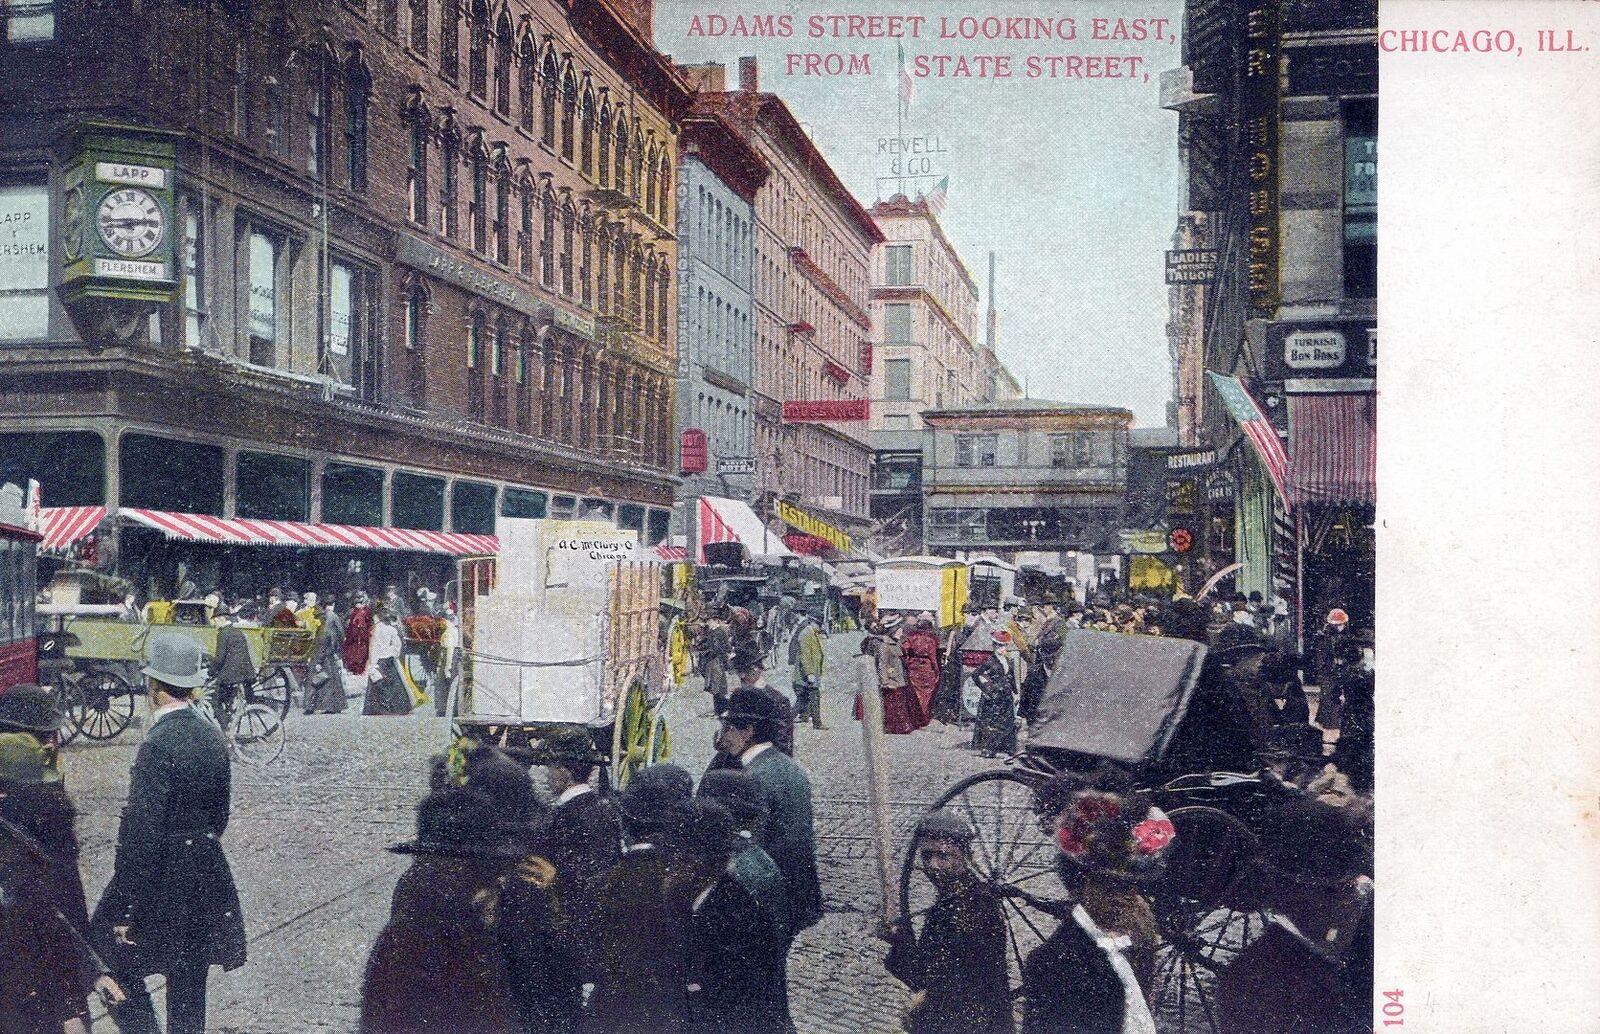 CHICAGO IL - Adams Street Looking East From State Street Postcard